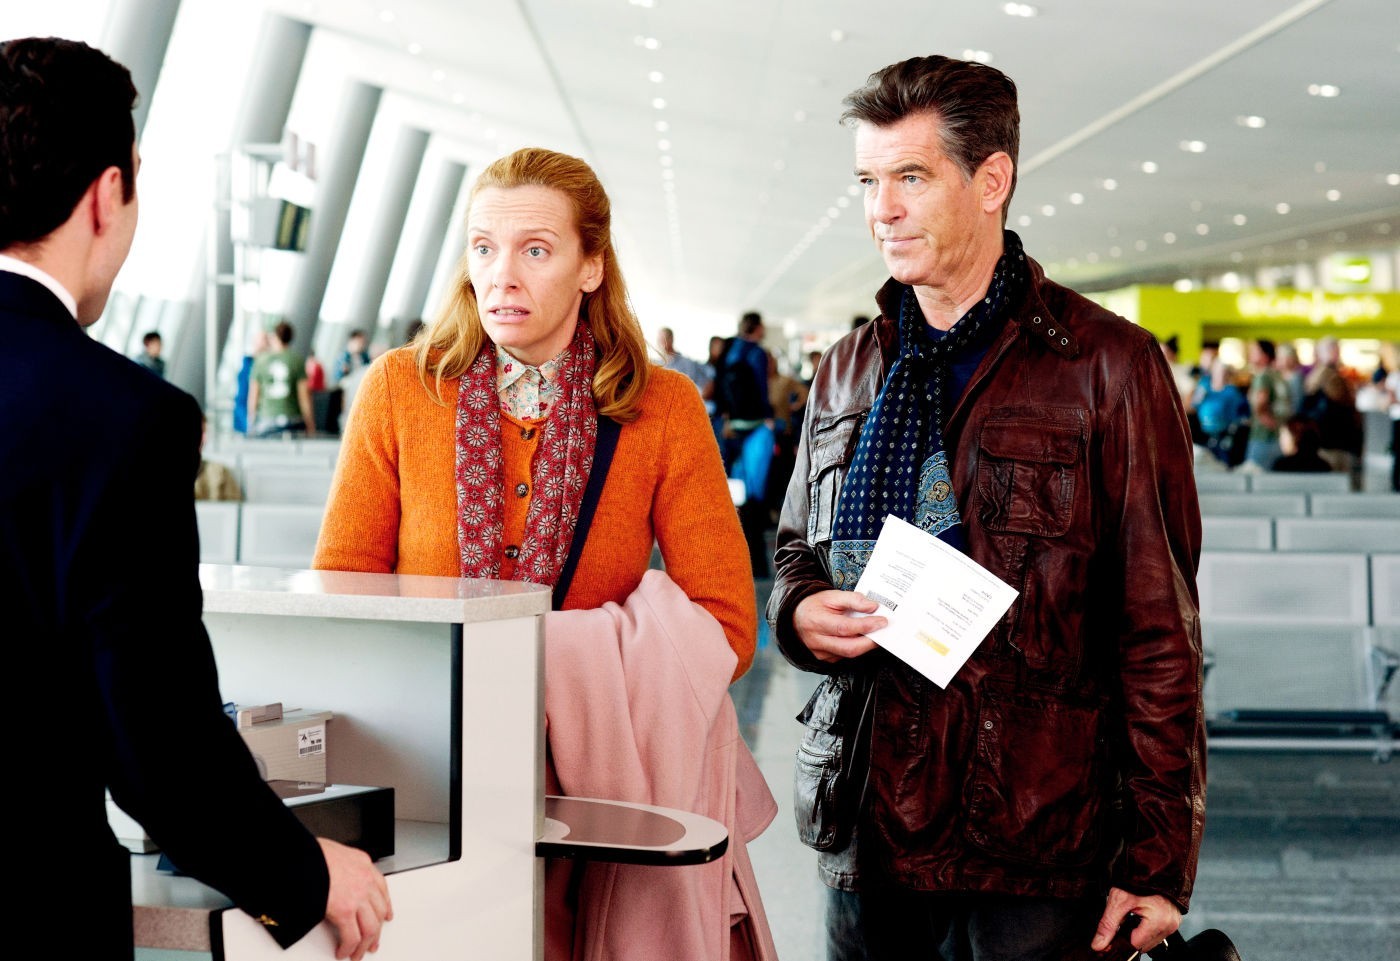 Toni Collette stars as Maureen and Pierce Brosnan stars as Martin Sharp in Magnolia Pictures' A Long Way Down (2014)